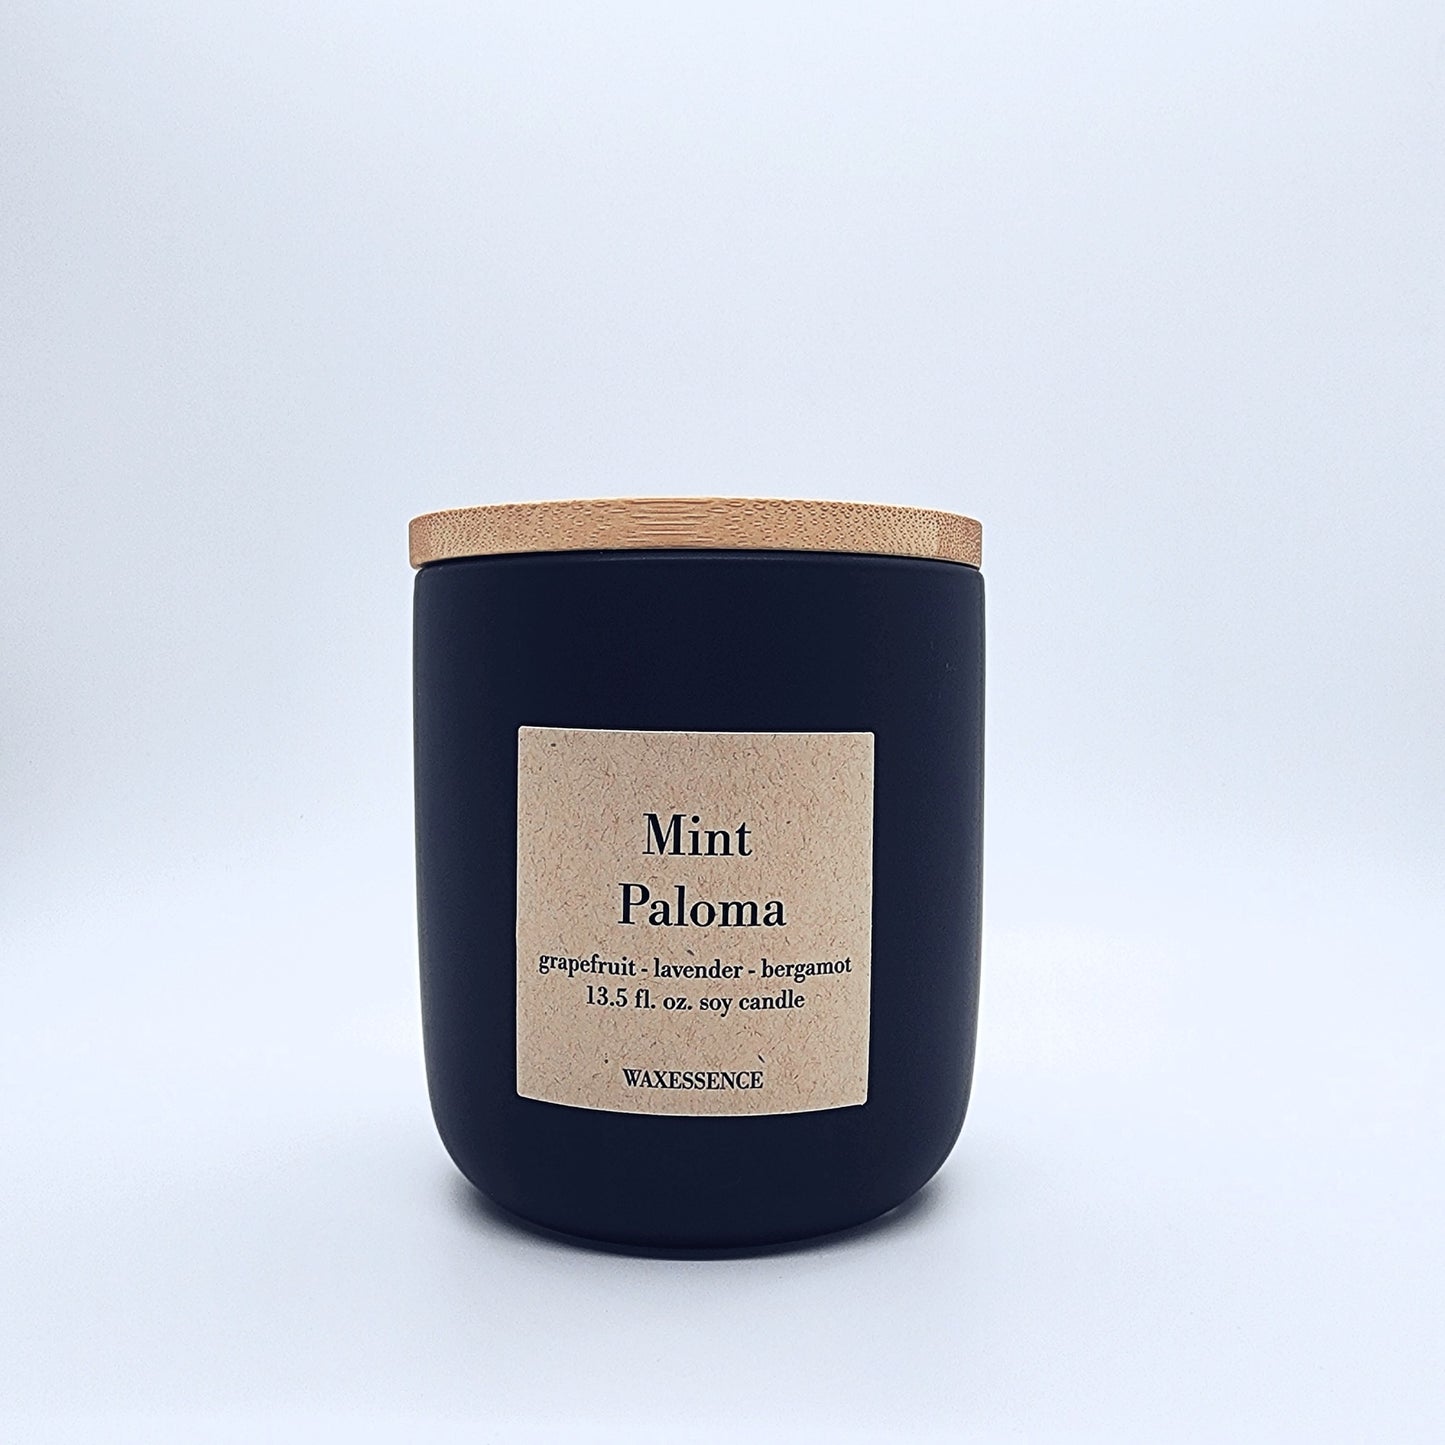 Mint Paloma Home Candle | Luxury Candle | Home Decor | Aromatherapy | Black Nordic Ceramic Tumbler | Soy Wax | 13.5 fl. oz.